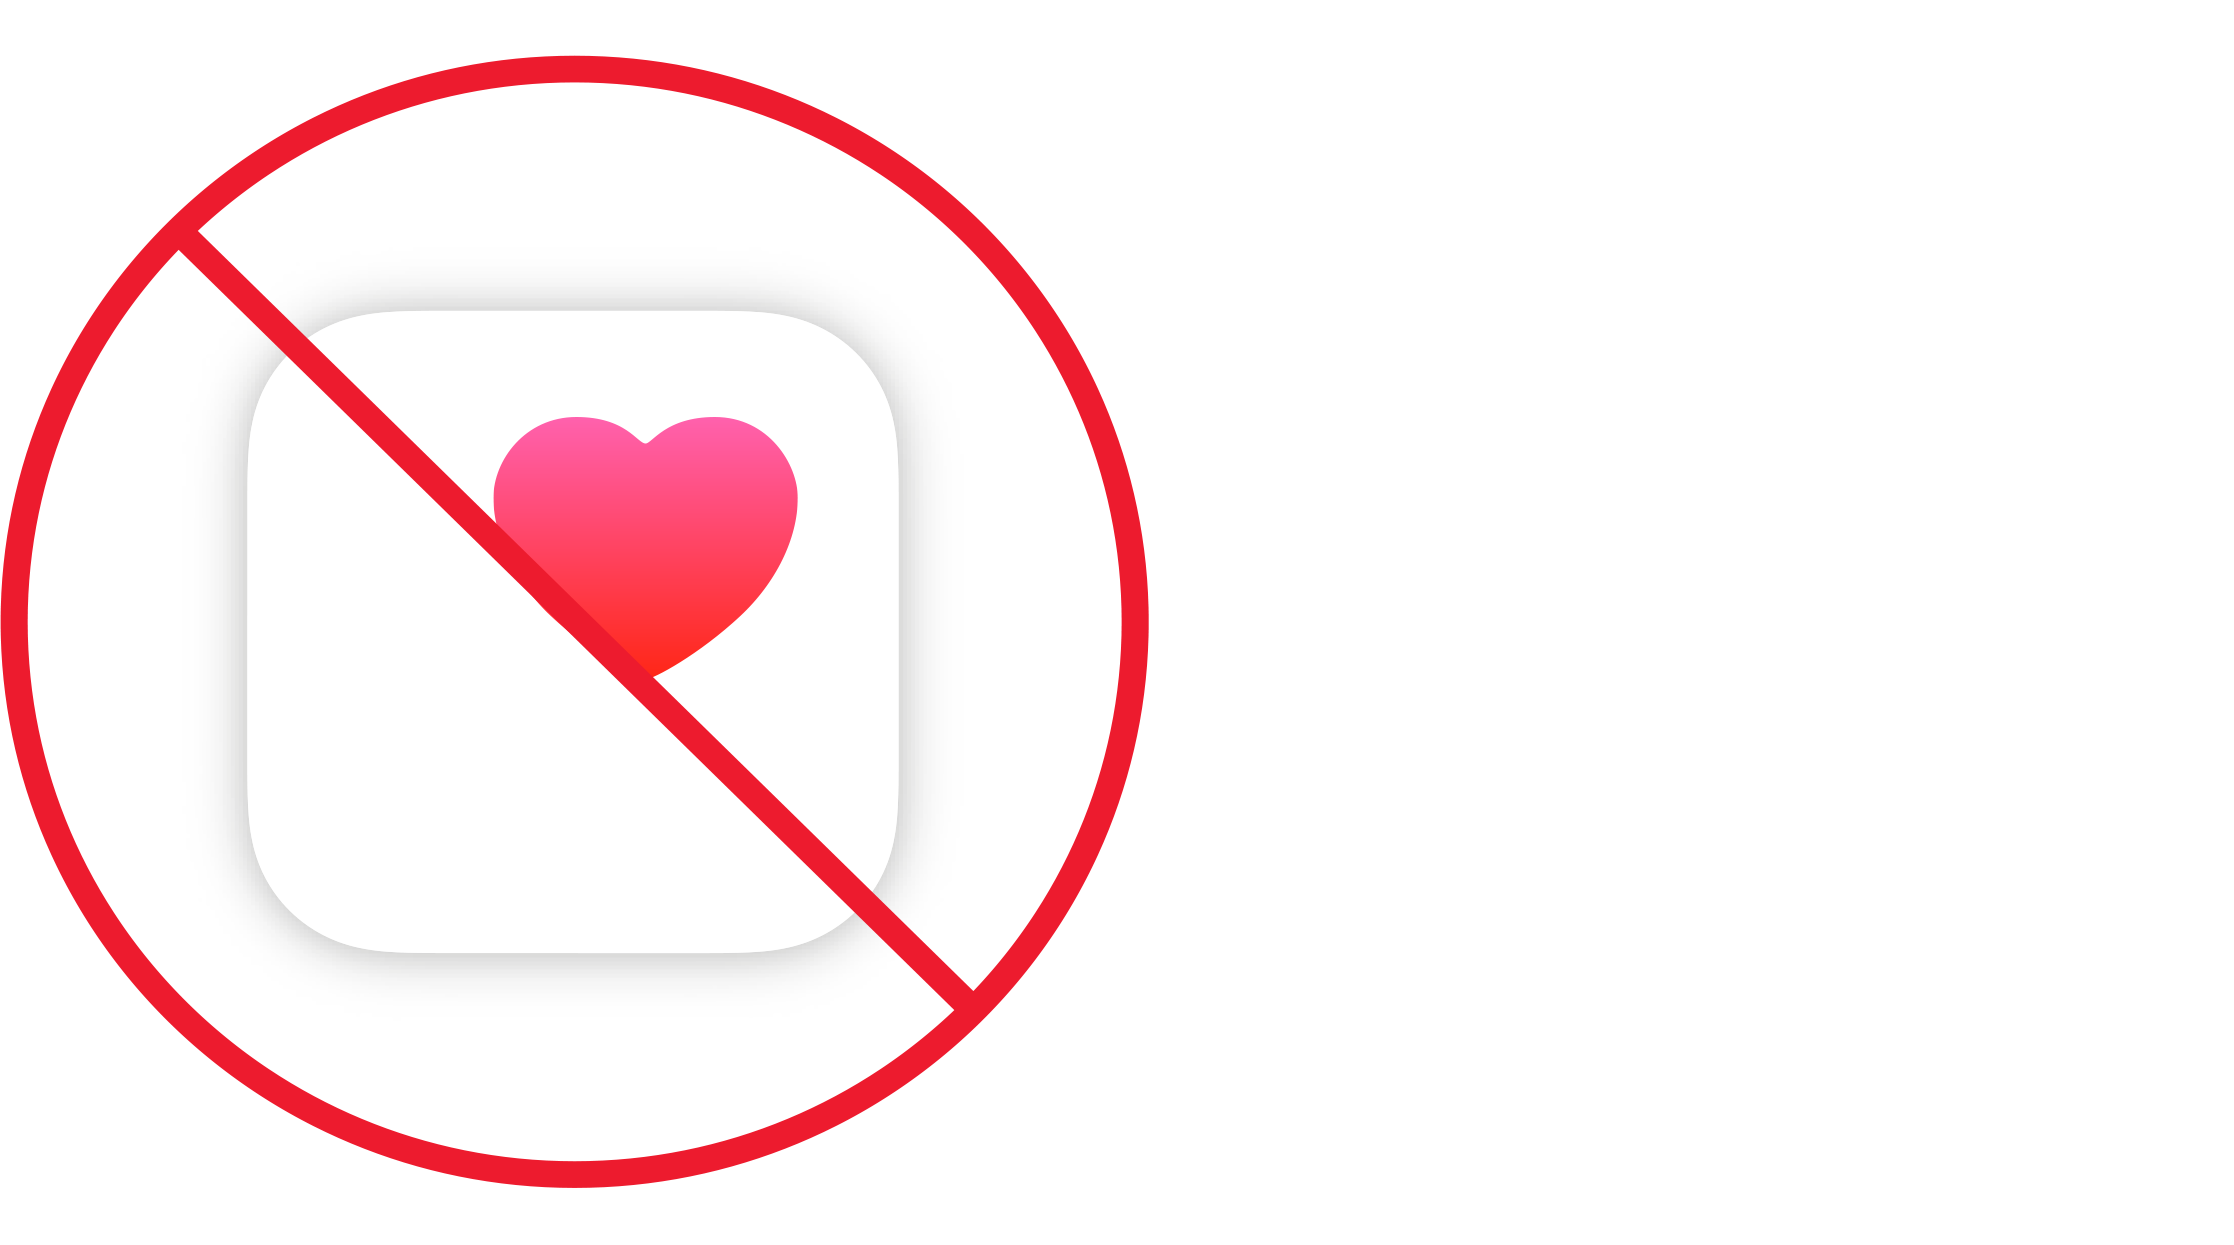 Misused Apple Health app icon with red circle and slash.